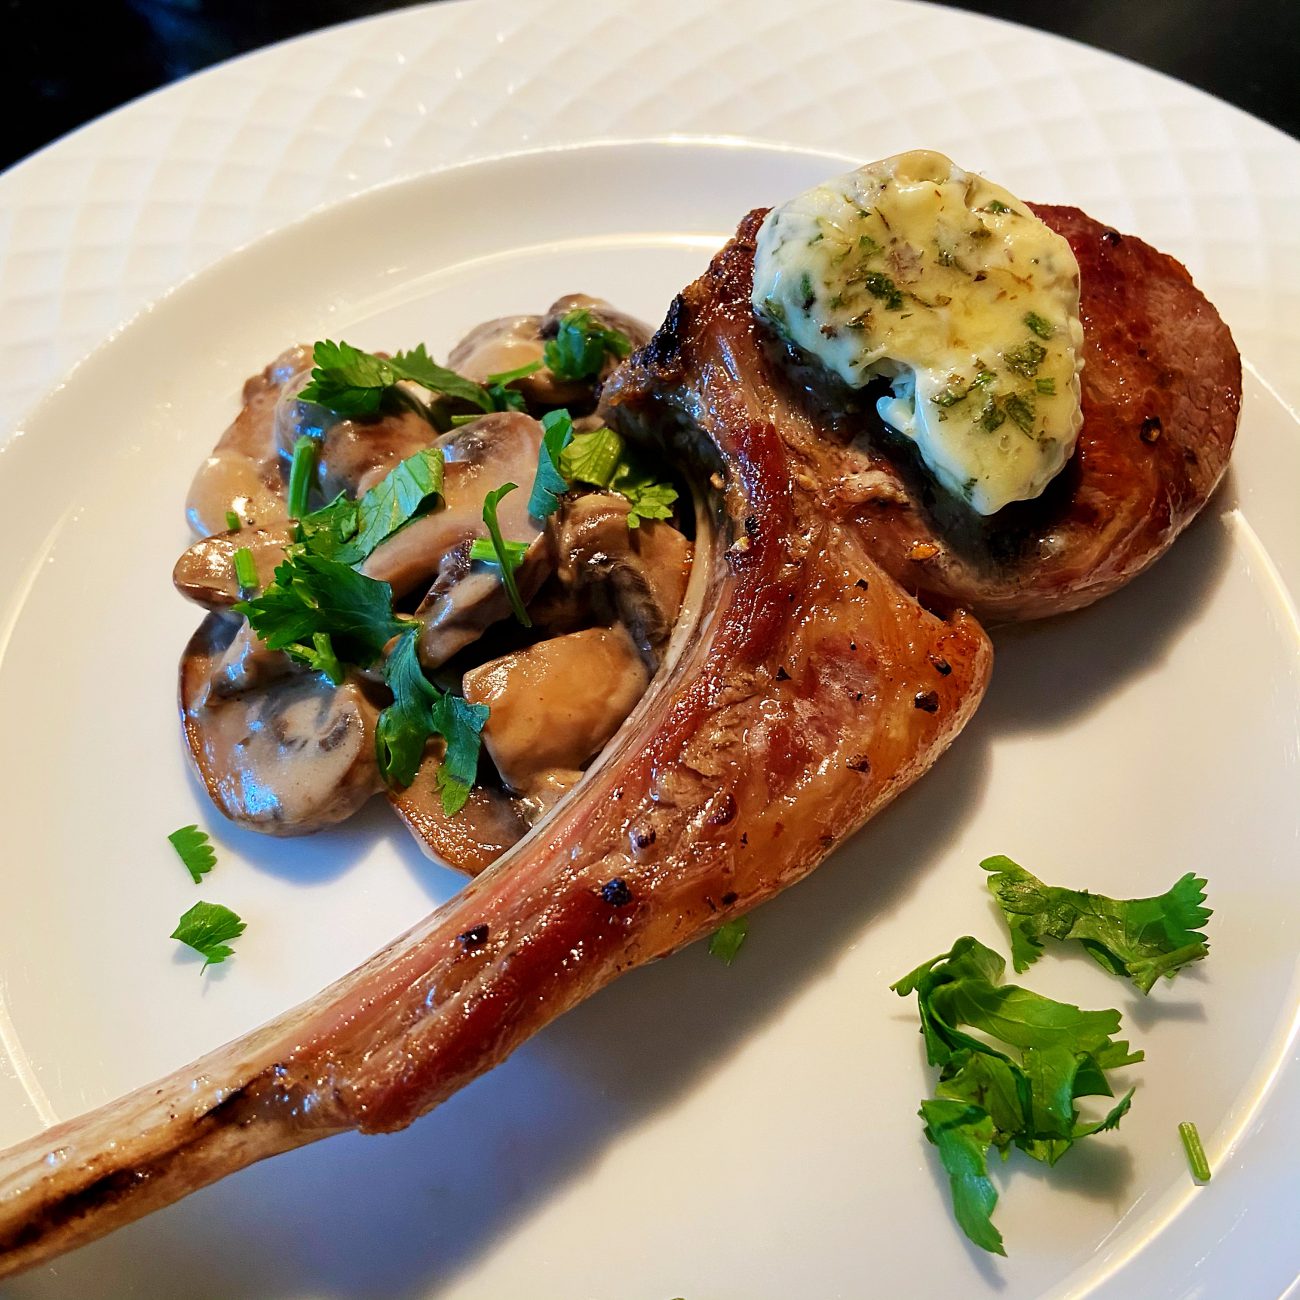 Grill Lamb chop with Rosemary garlic butter